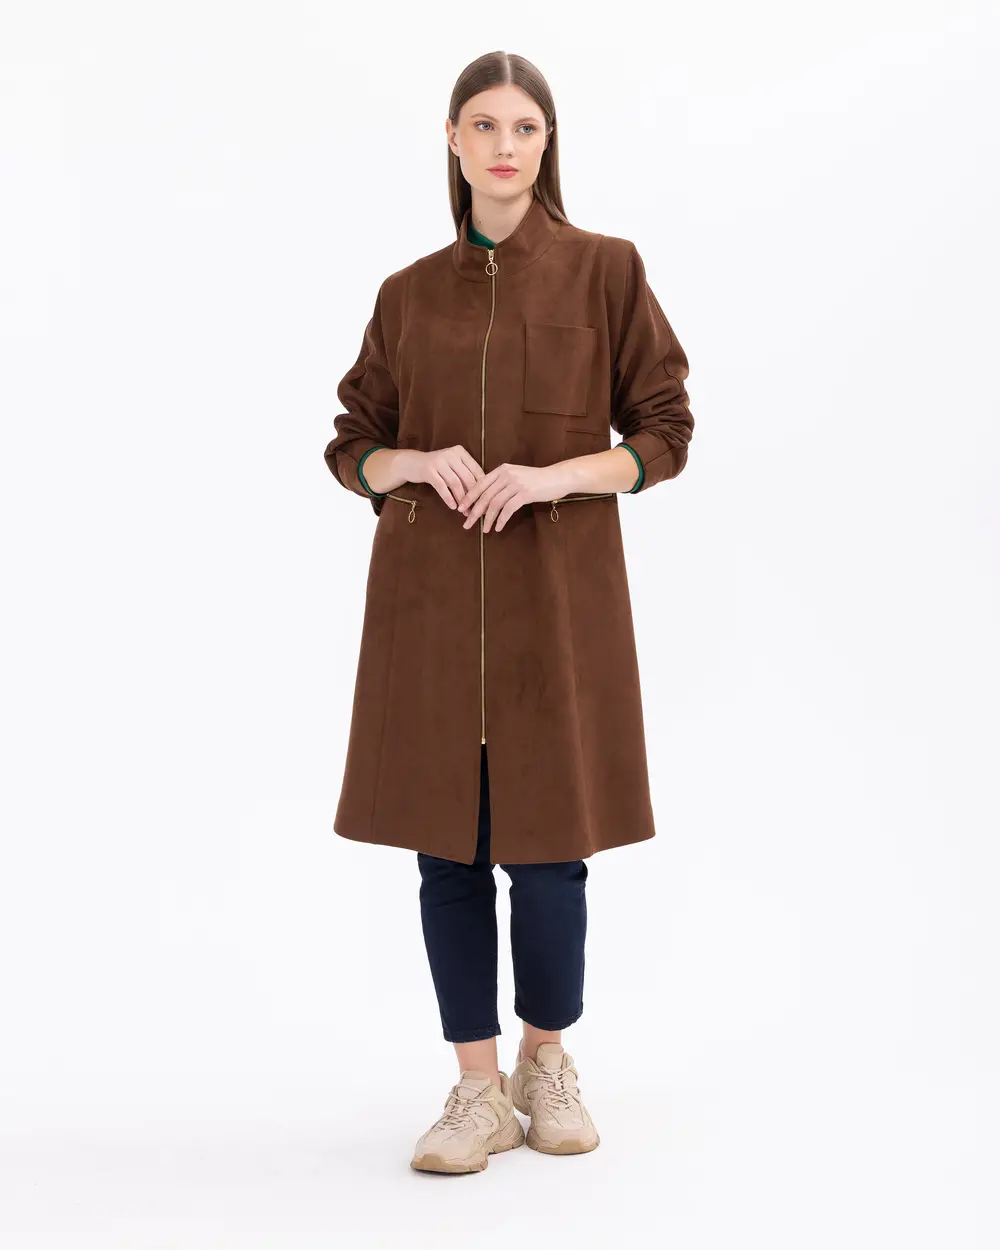 Plus Size Zippered Suede Coat